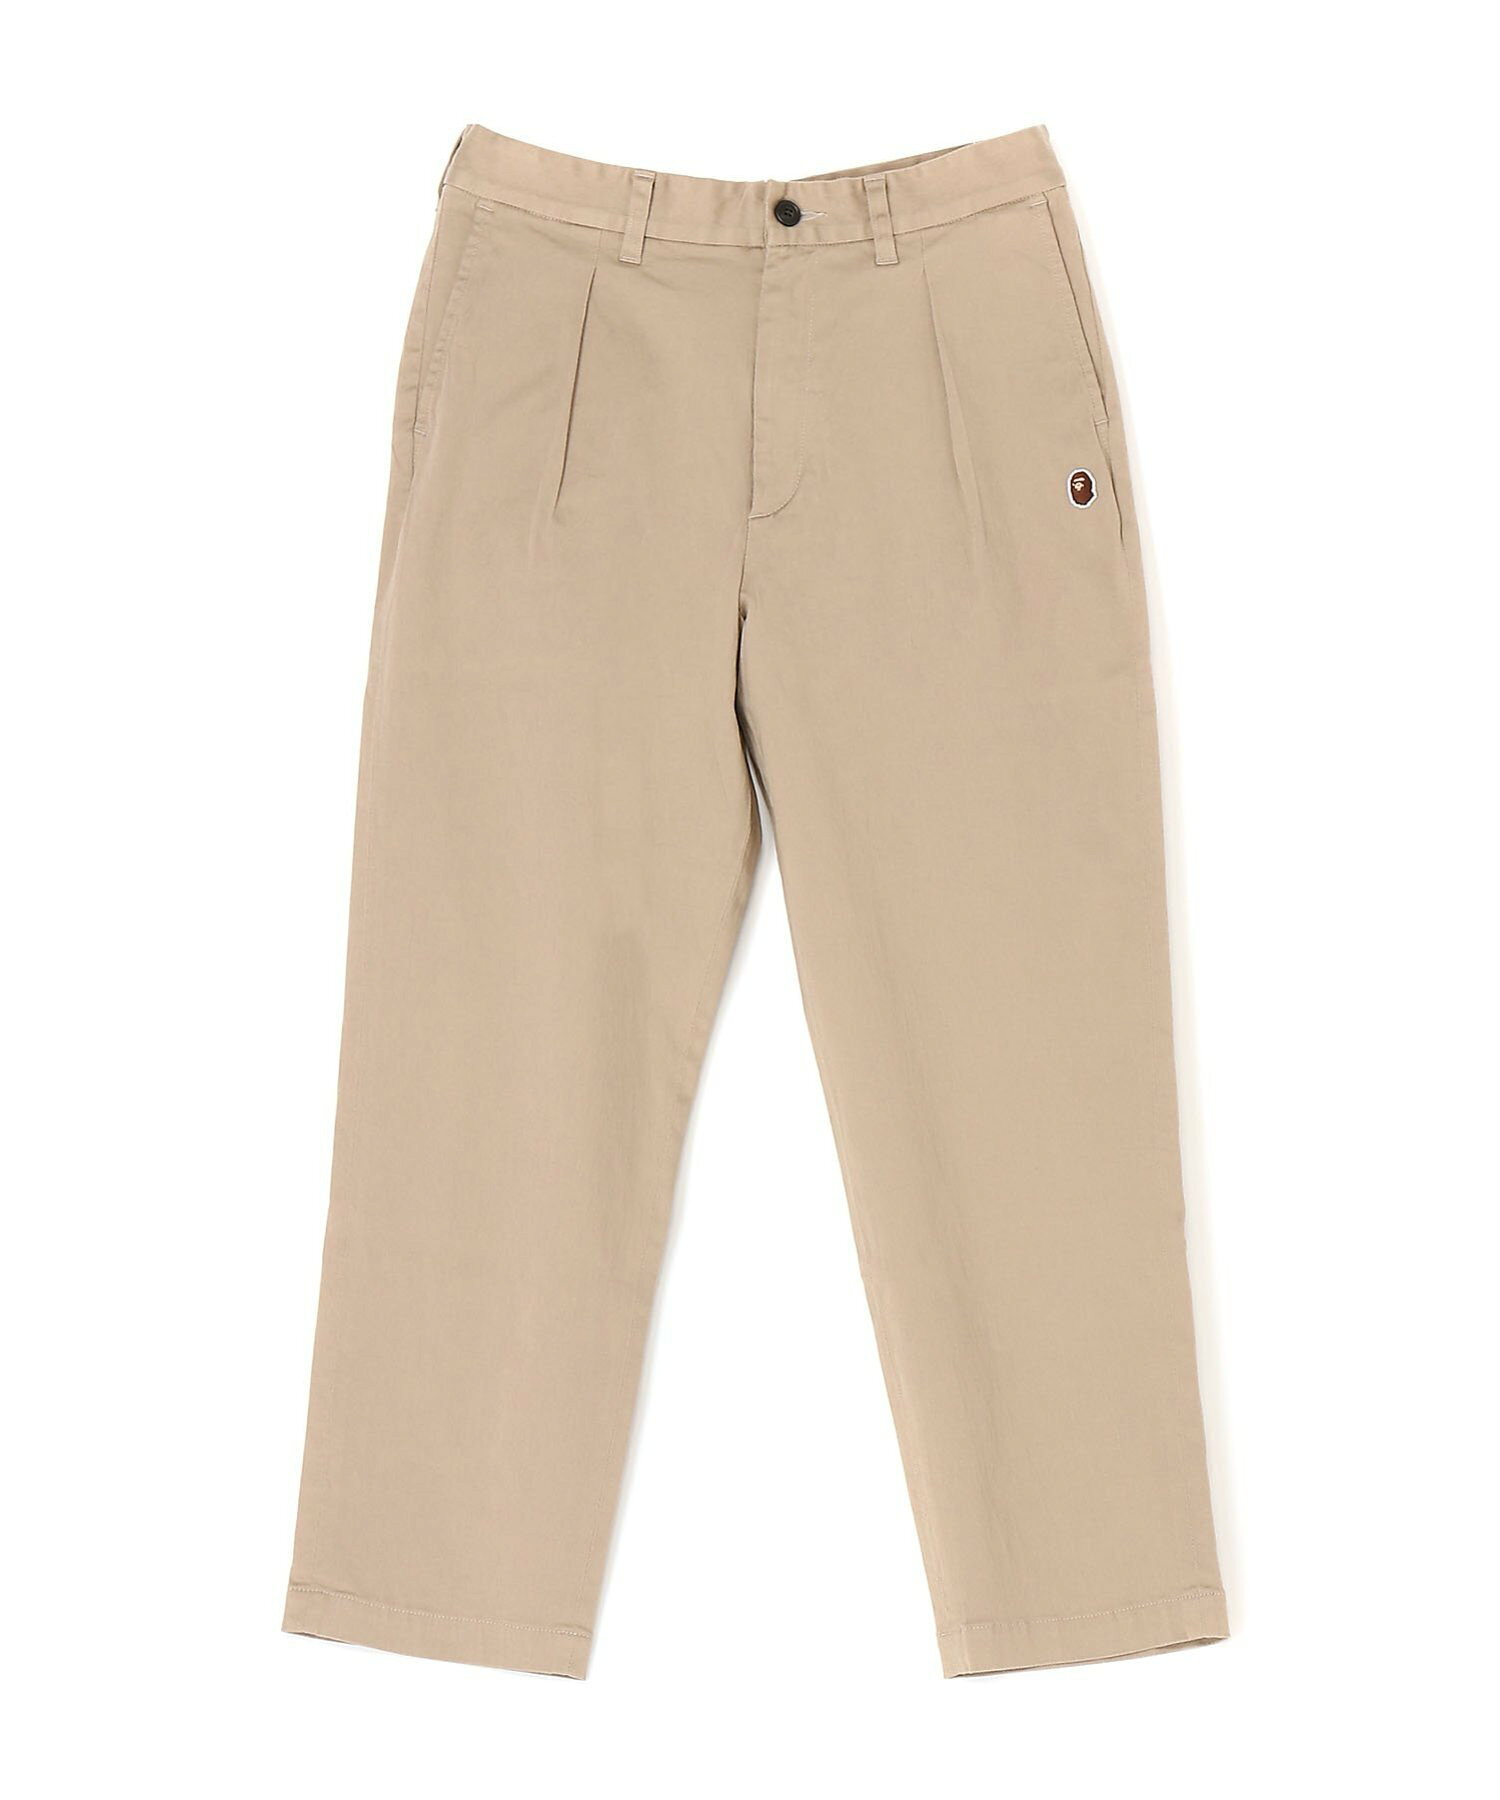 ONE POINT LOOSE FIT CHINO PANTS